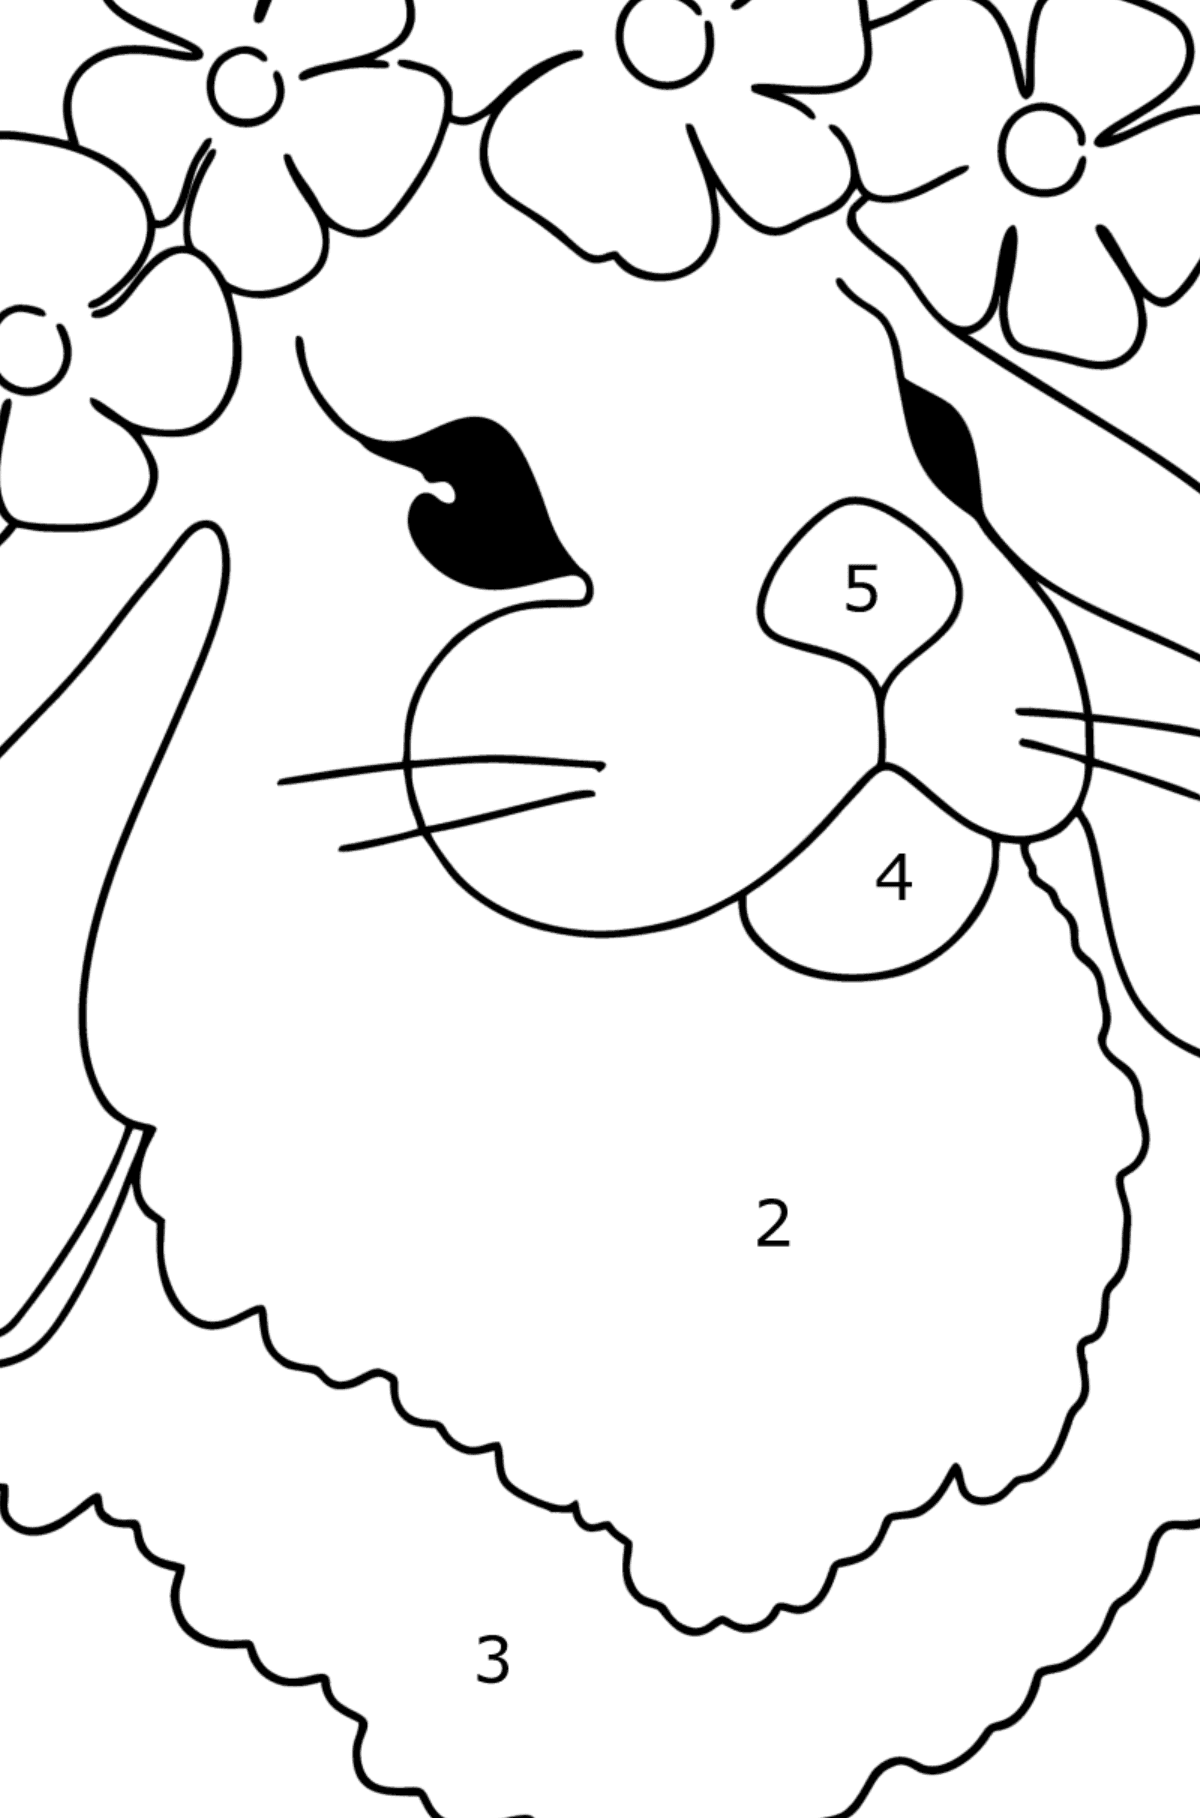 Hare Face coloring page - Coloring by Numbers for Kids